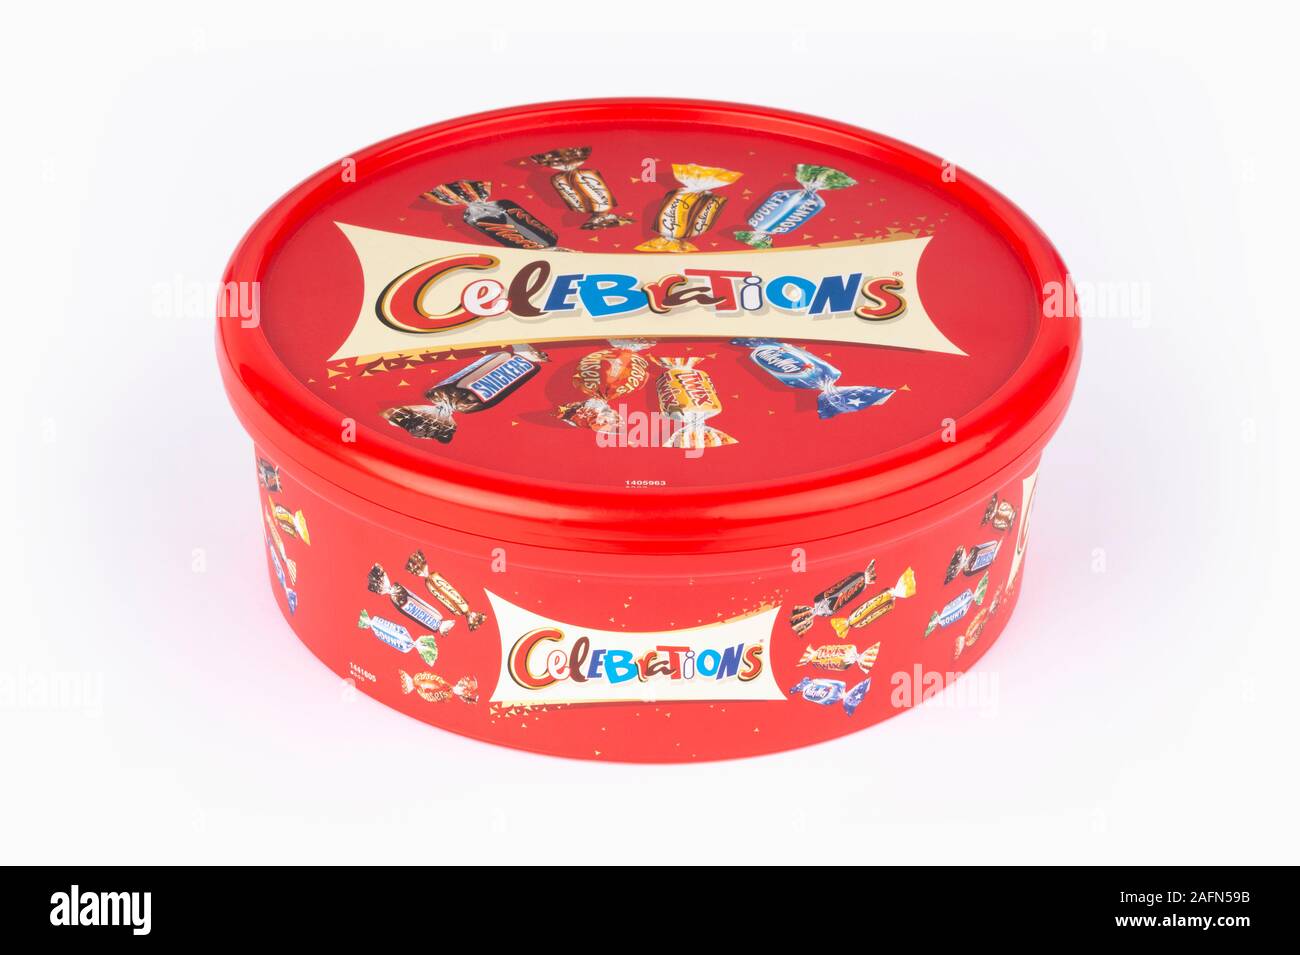 A box of Celebrations chocolate confectionery shot on a white background. Stock Photo